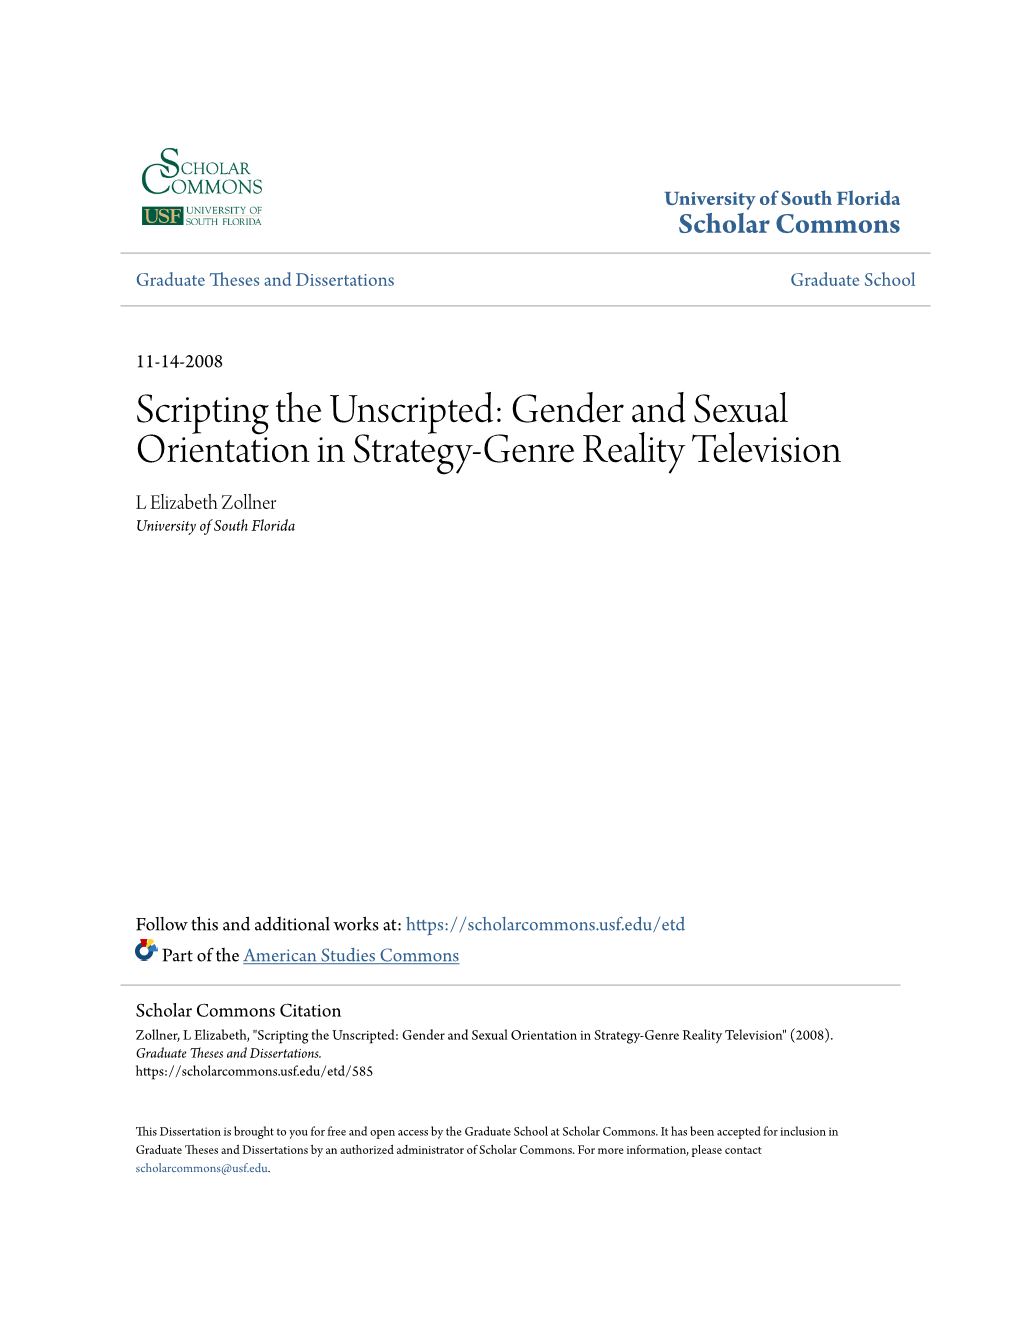 Gender and Sexual Orientation in Strategy-Genre Reality Television L Elizabeth Zollner University of South Florida